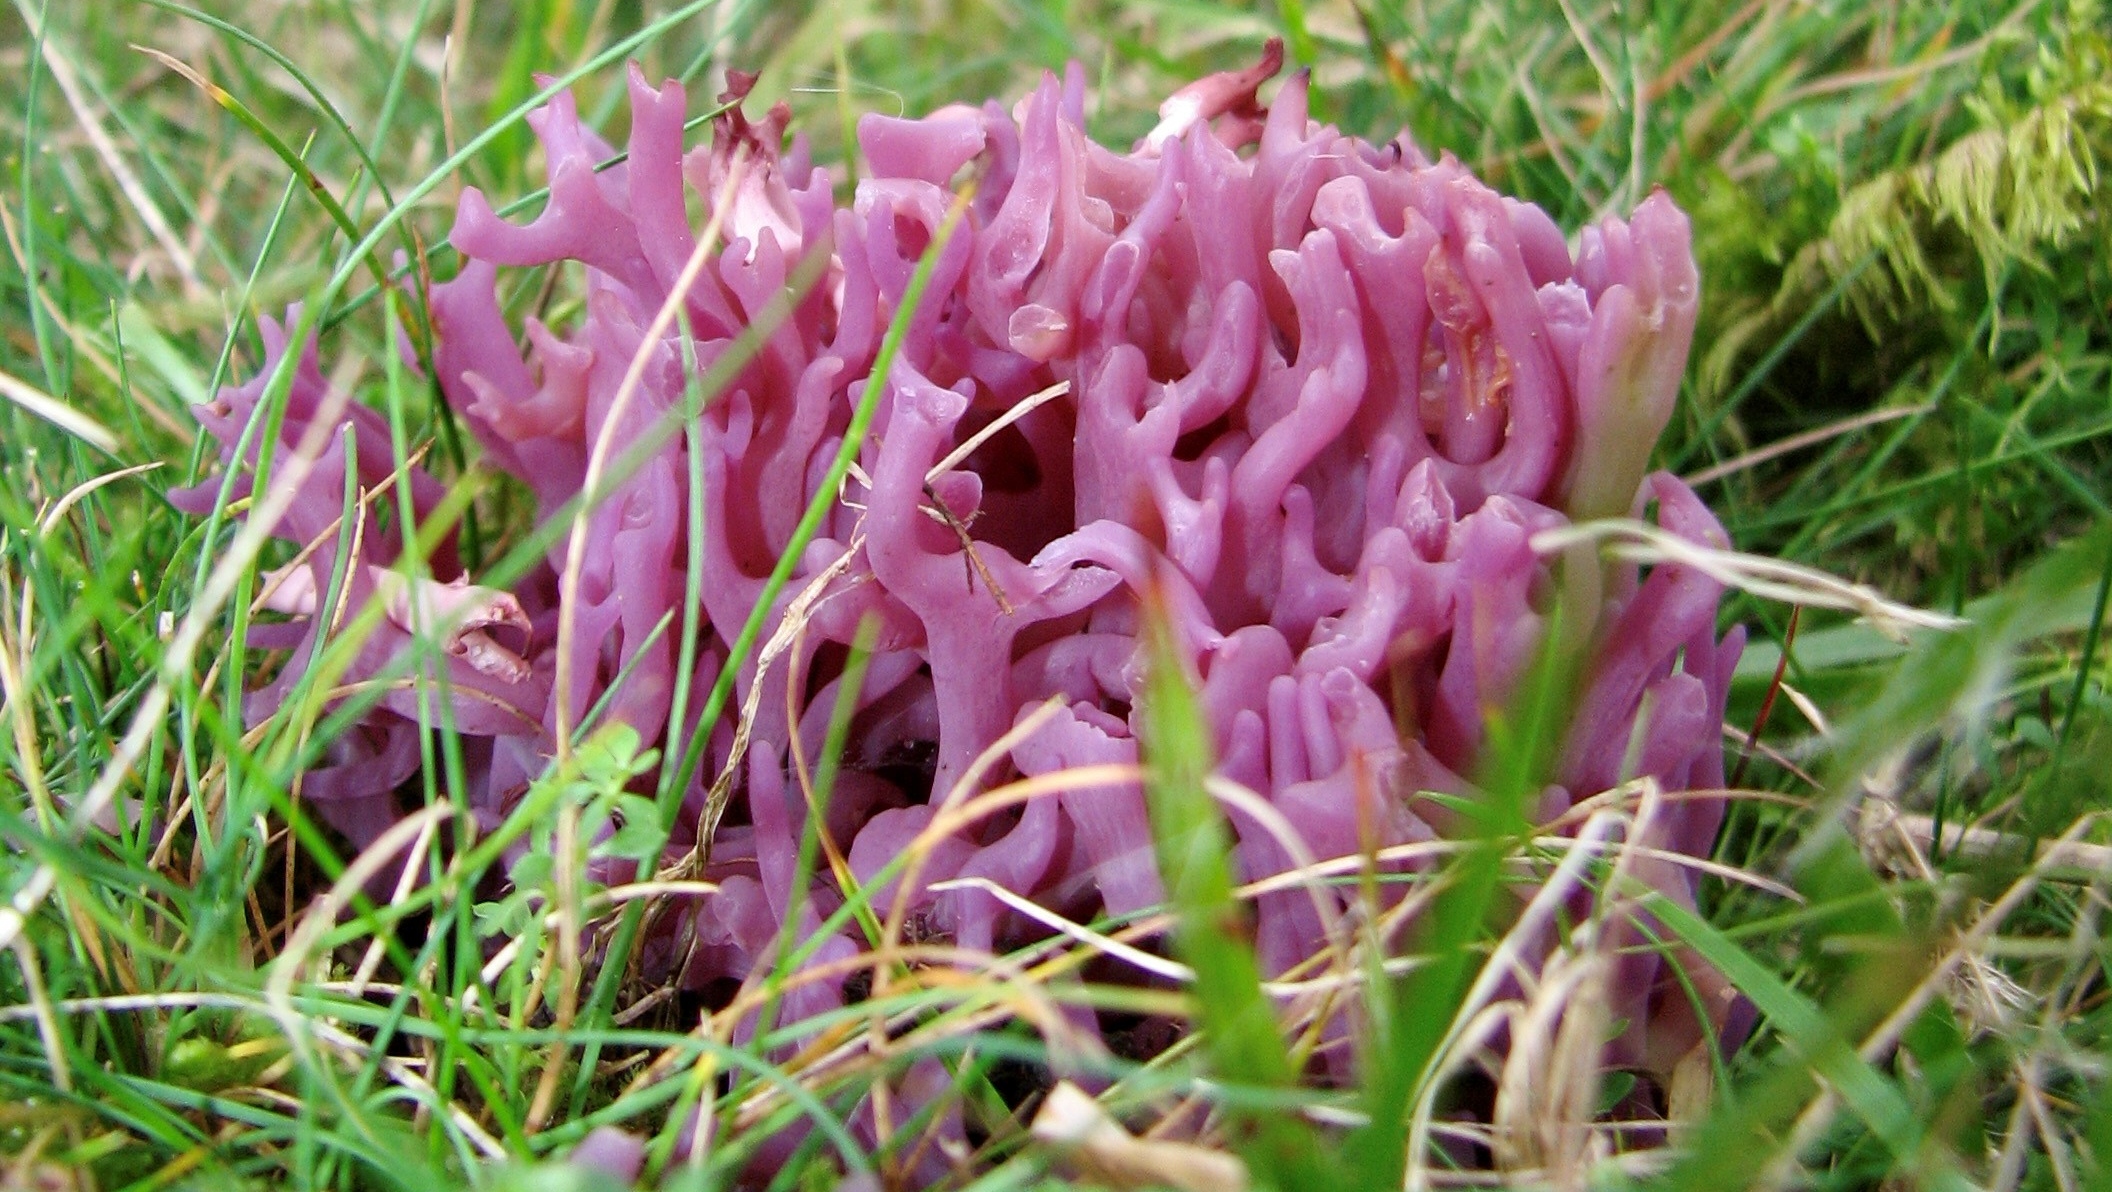 Finds made by the study include rare violet coral fungus.